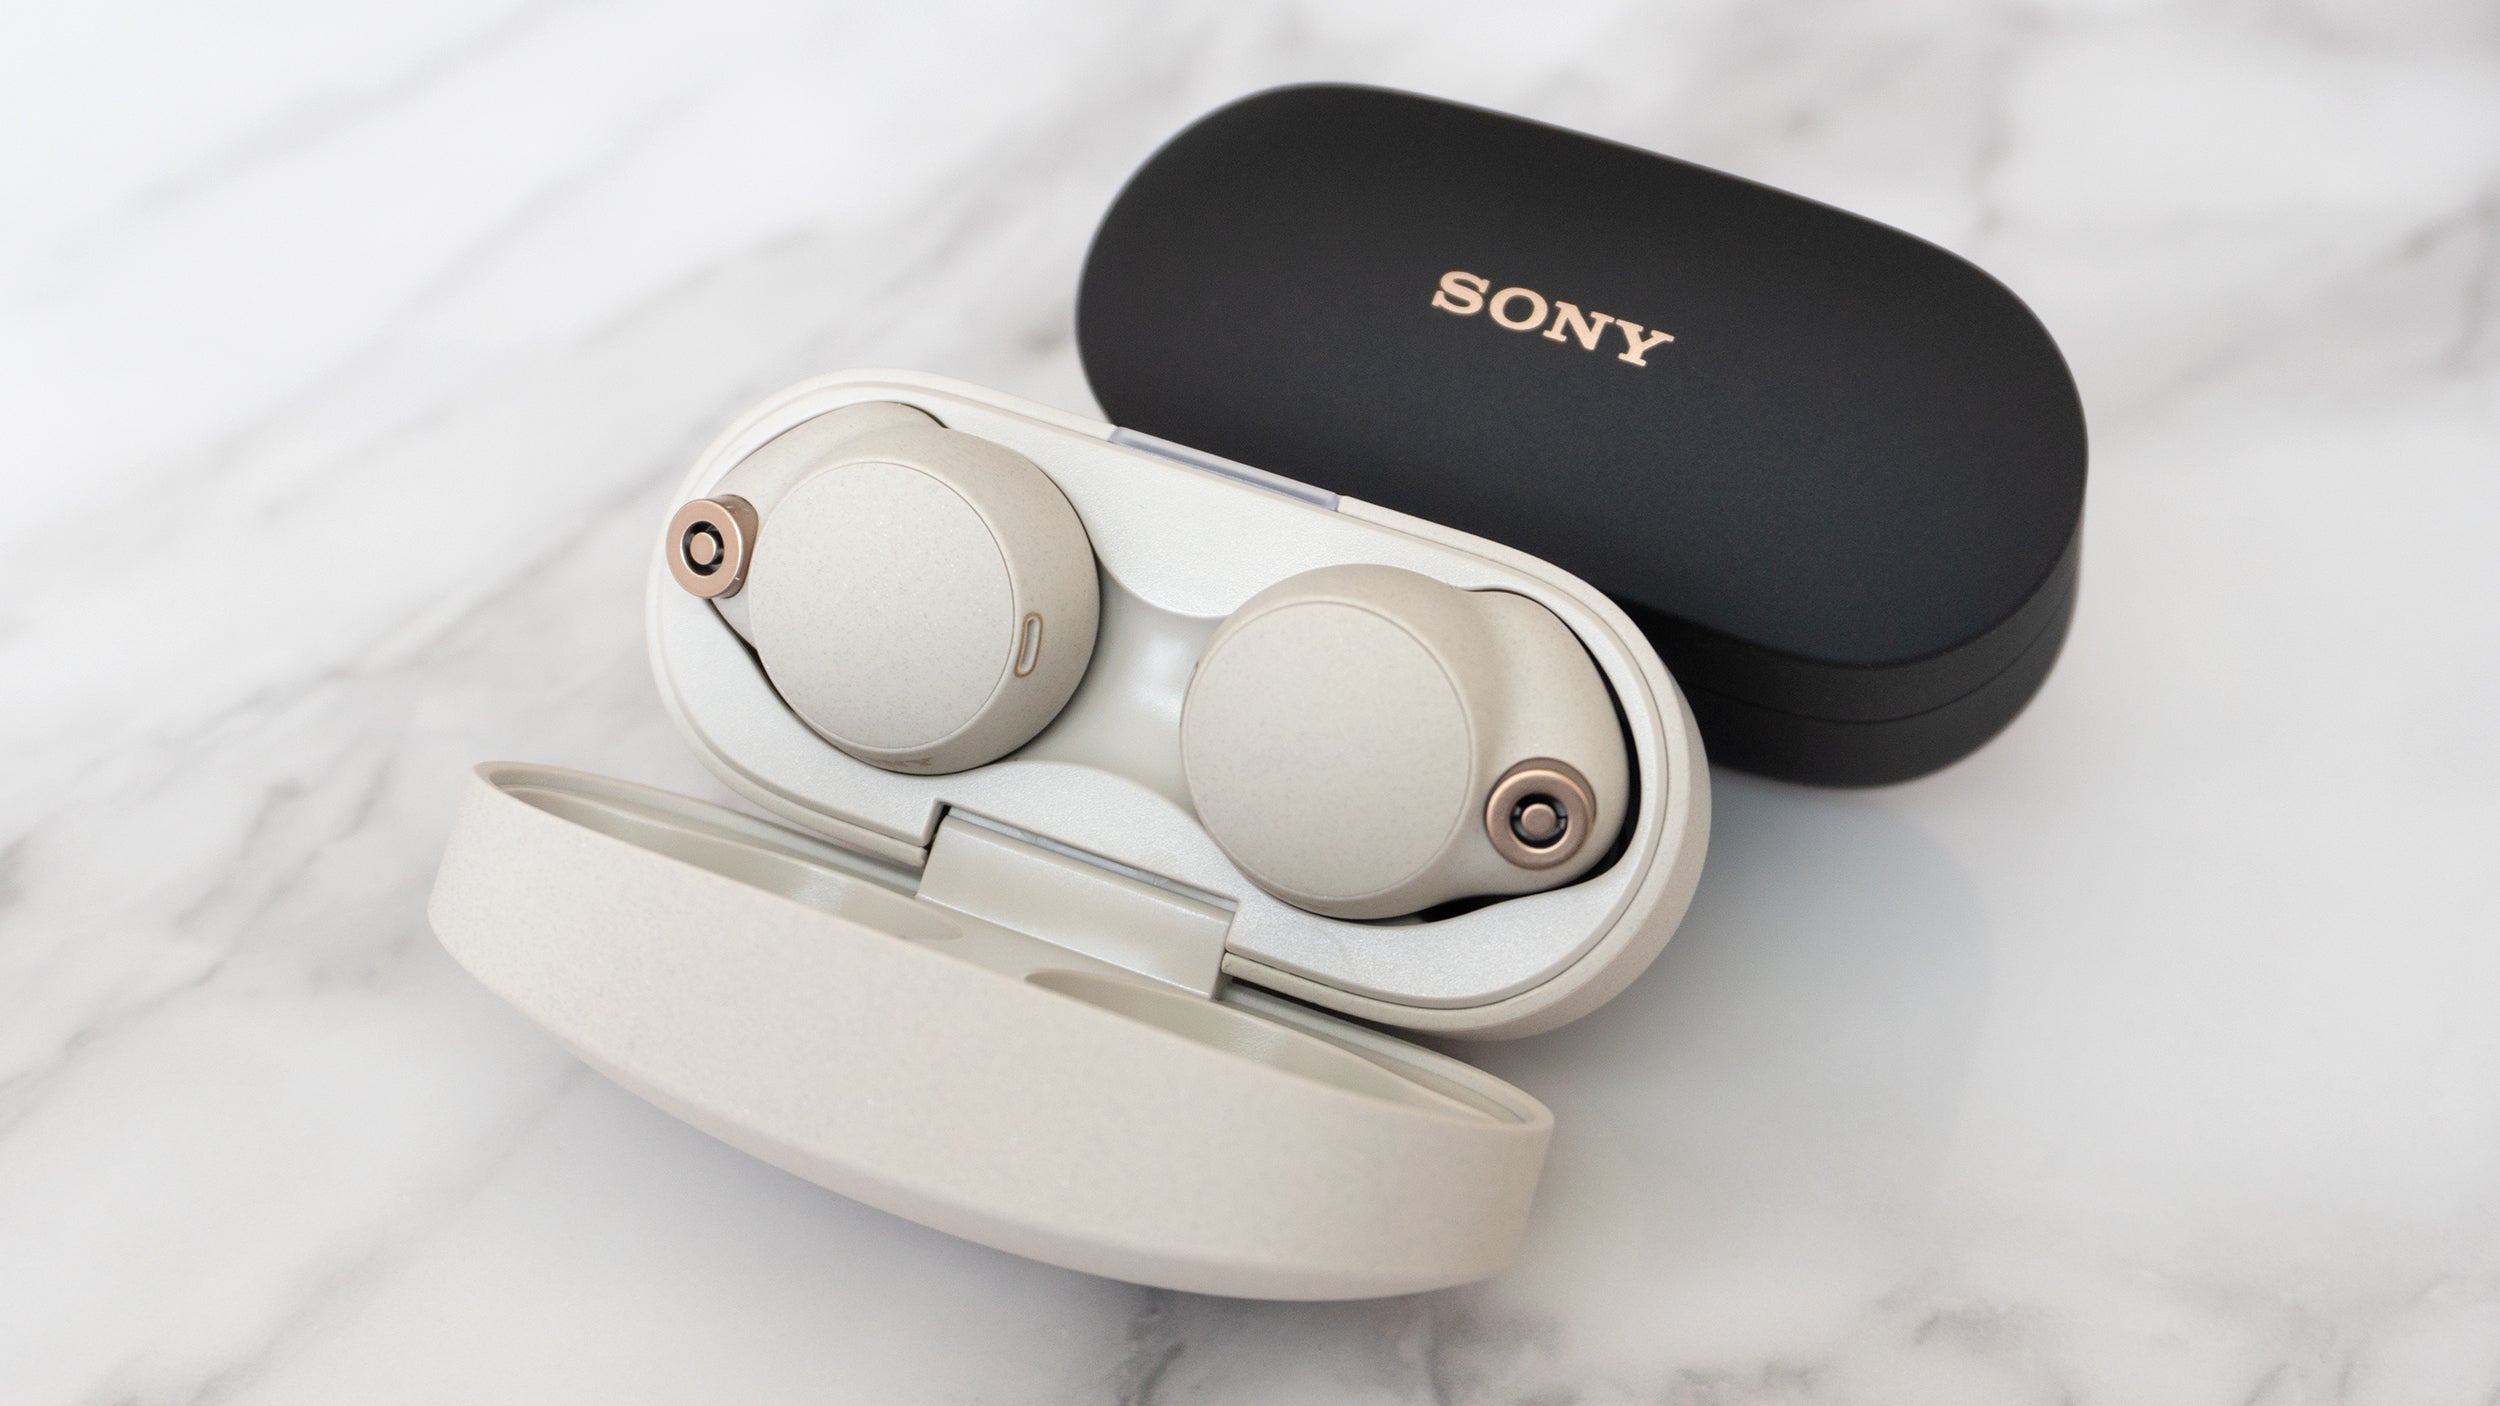 The Sony WF-1000XM4 wireless earbuds are available in black or '80s desktop tower PC beige colour options. (Photo: Andrew Liszewski/Gizmodo)